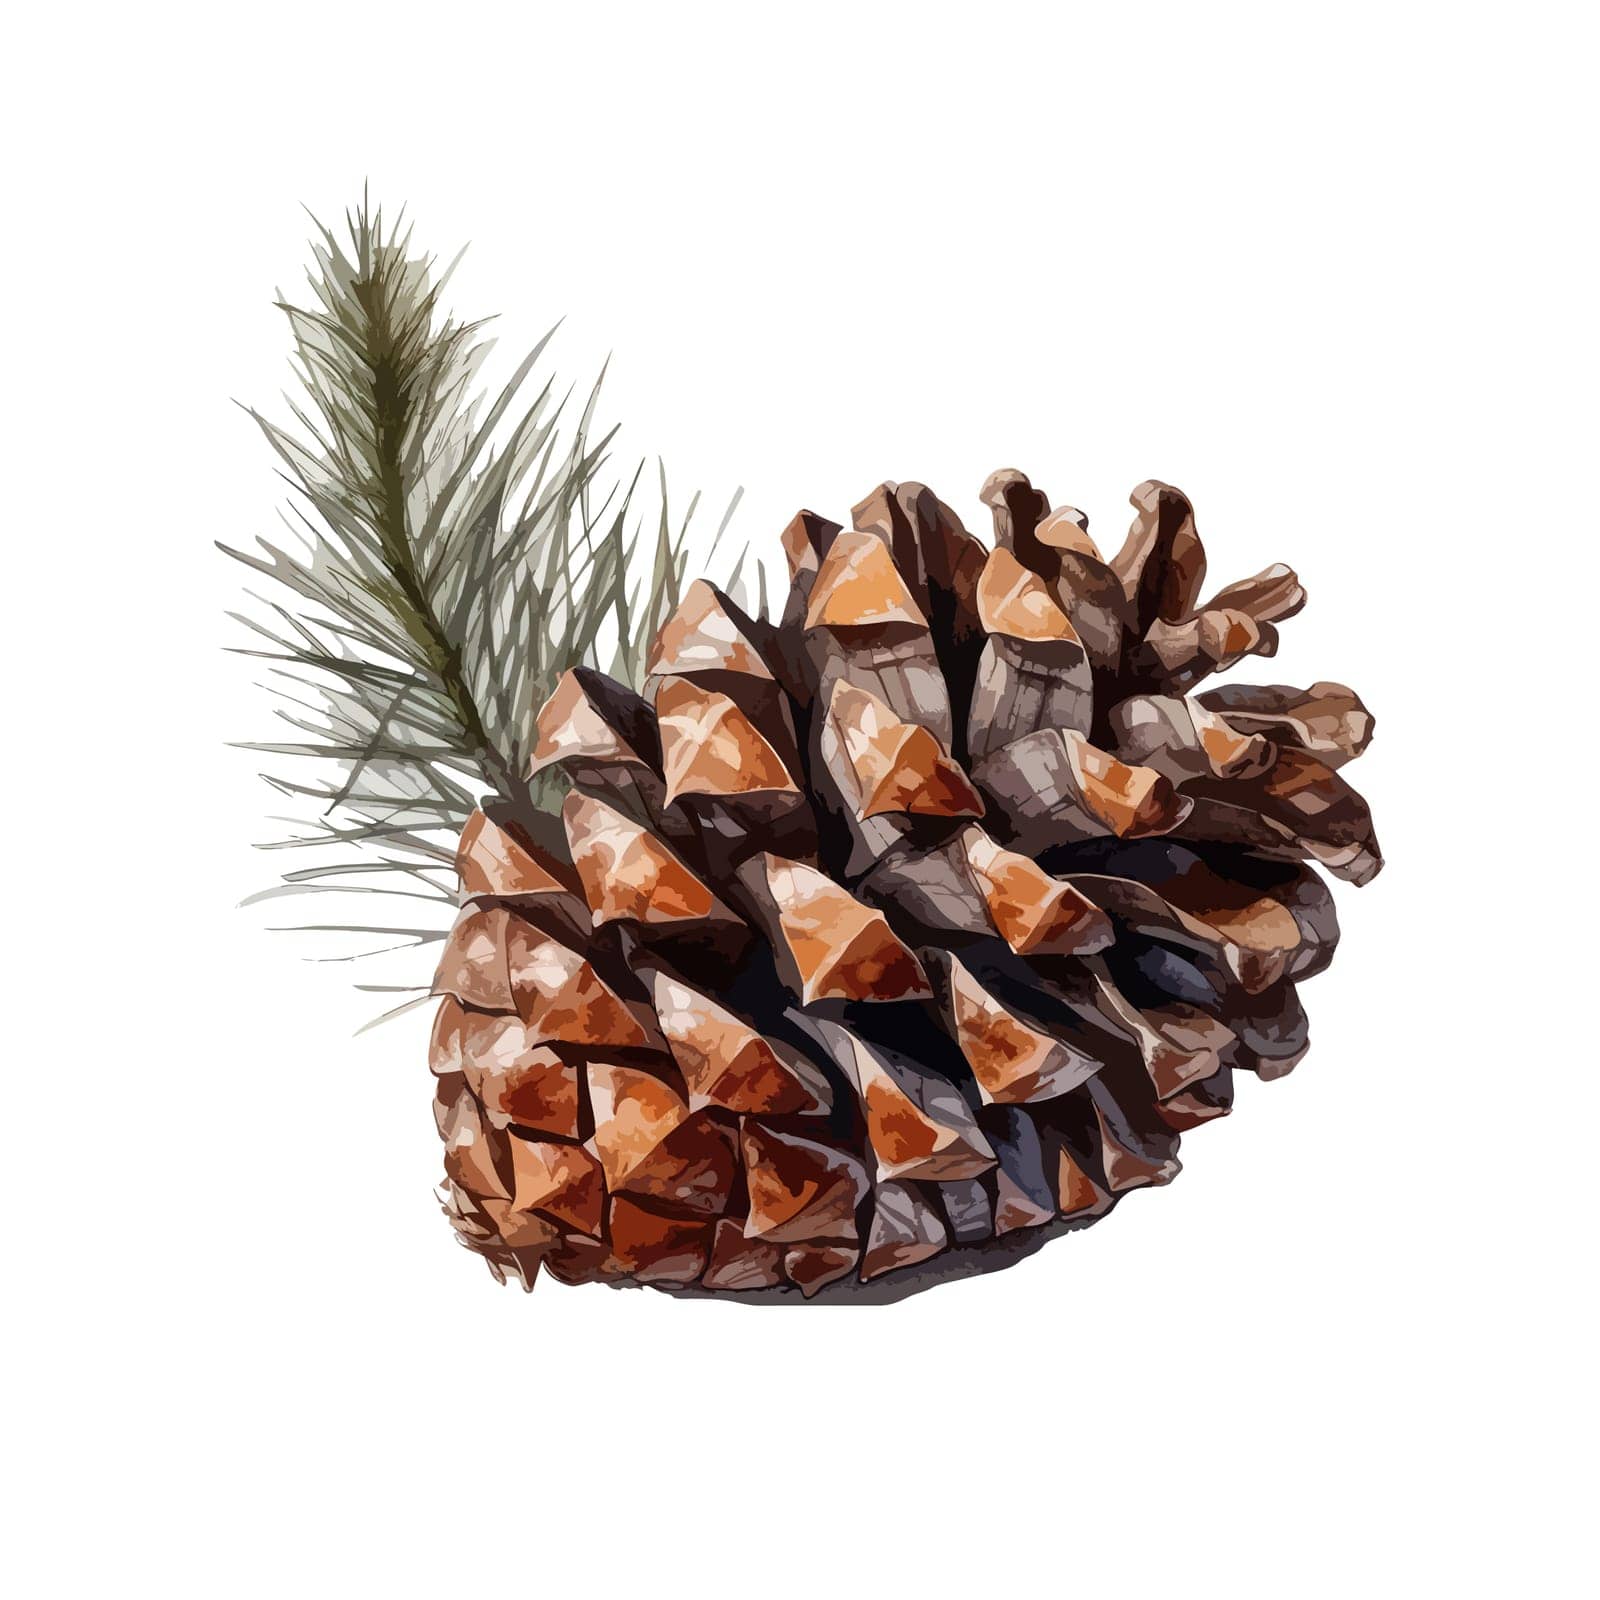 Watercolor pine cone isolated with pine branch. by ku4erashka